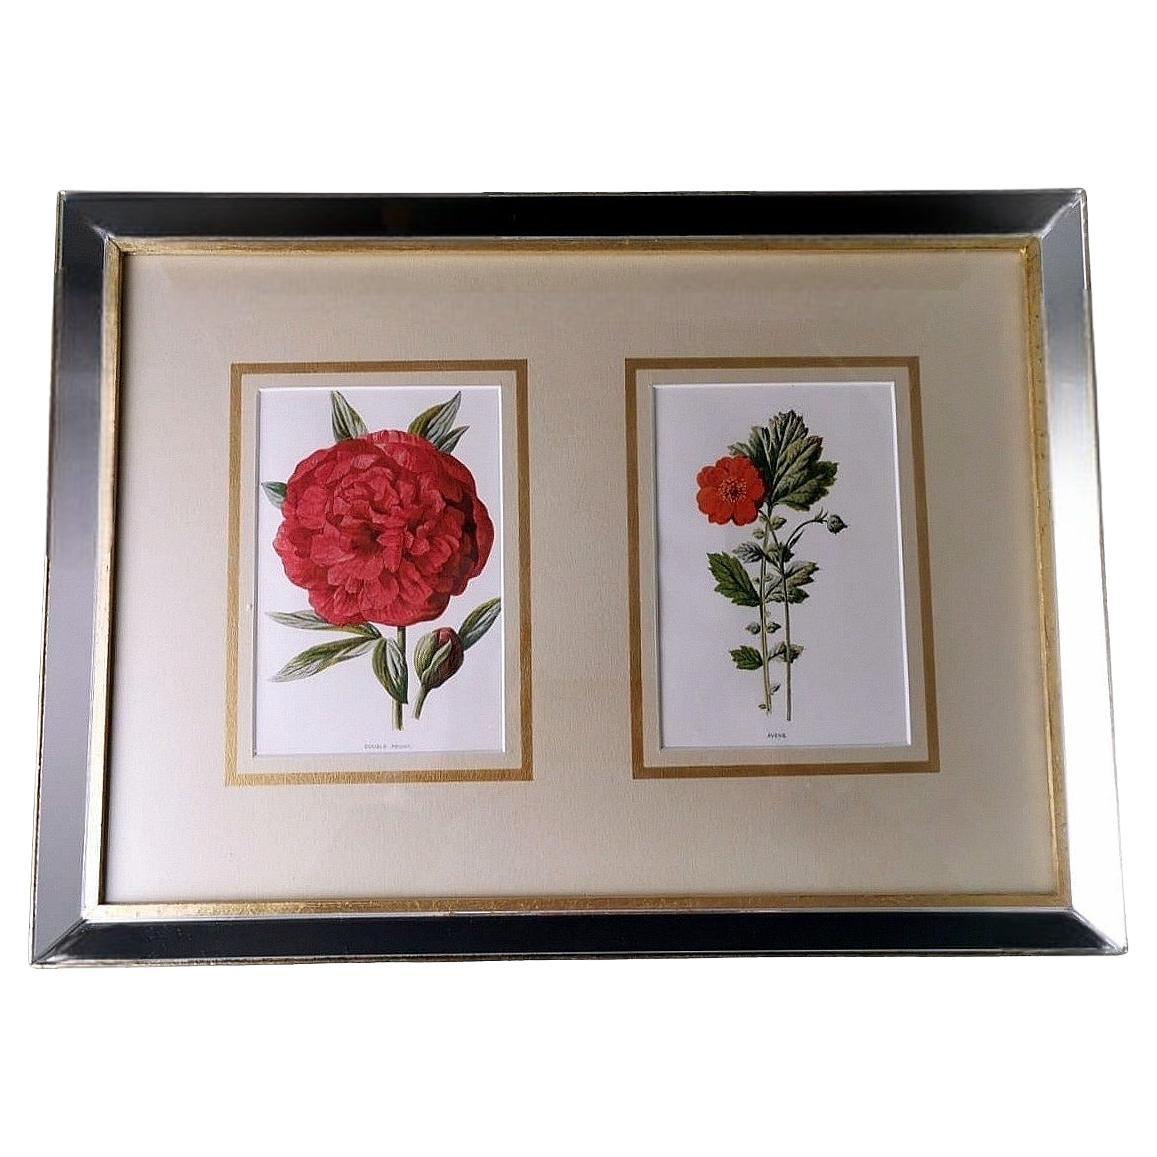 Mirror Frame With English Chromolithographic Prints With Flowers For Sale